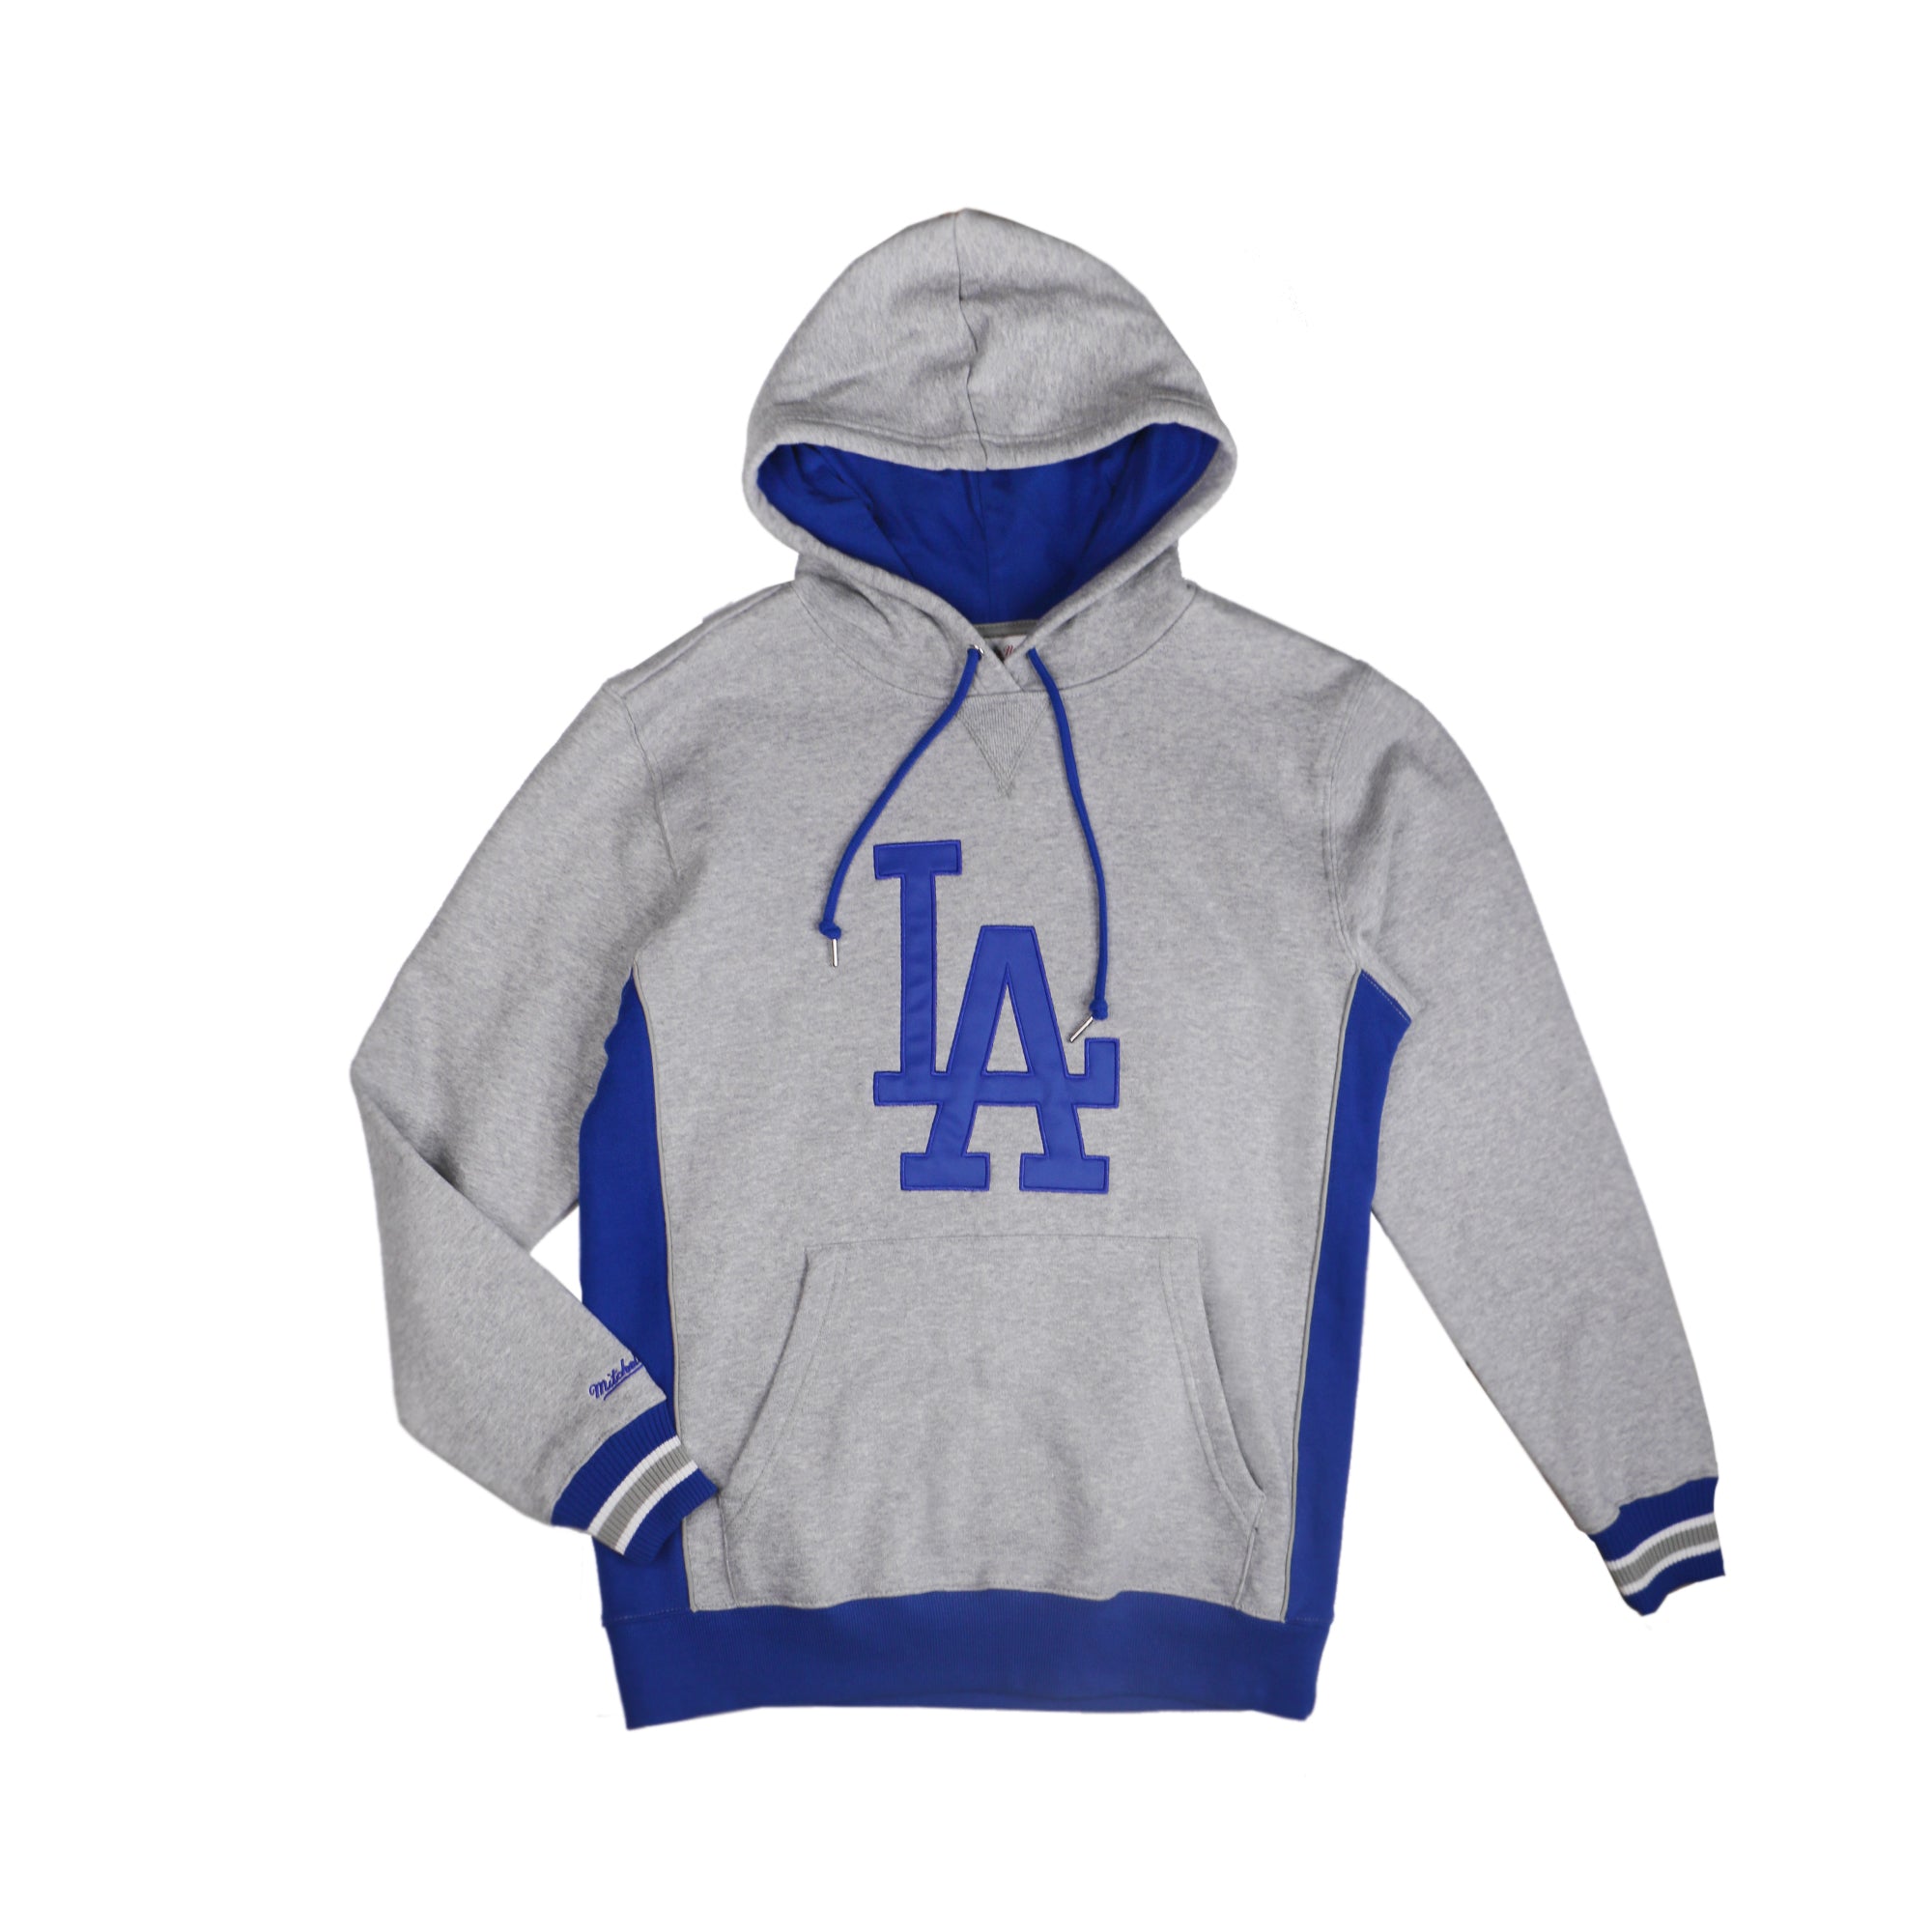 L.A. Dodgers Hoodies, Dodgers Hooded Pullovers, Zipped Hoodies